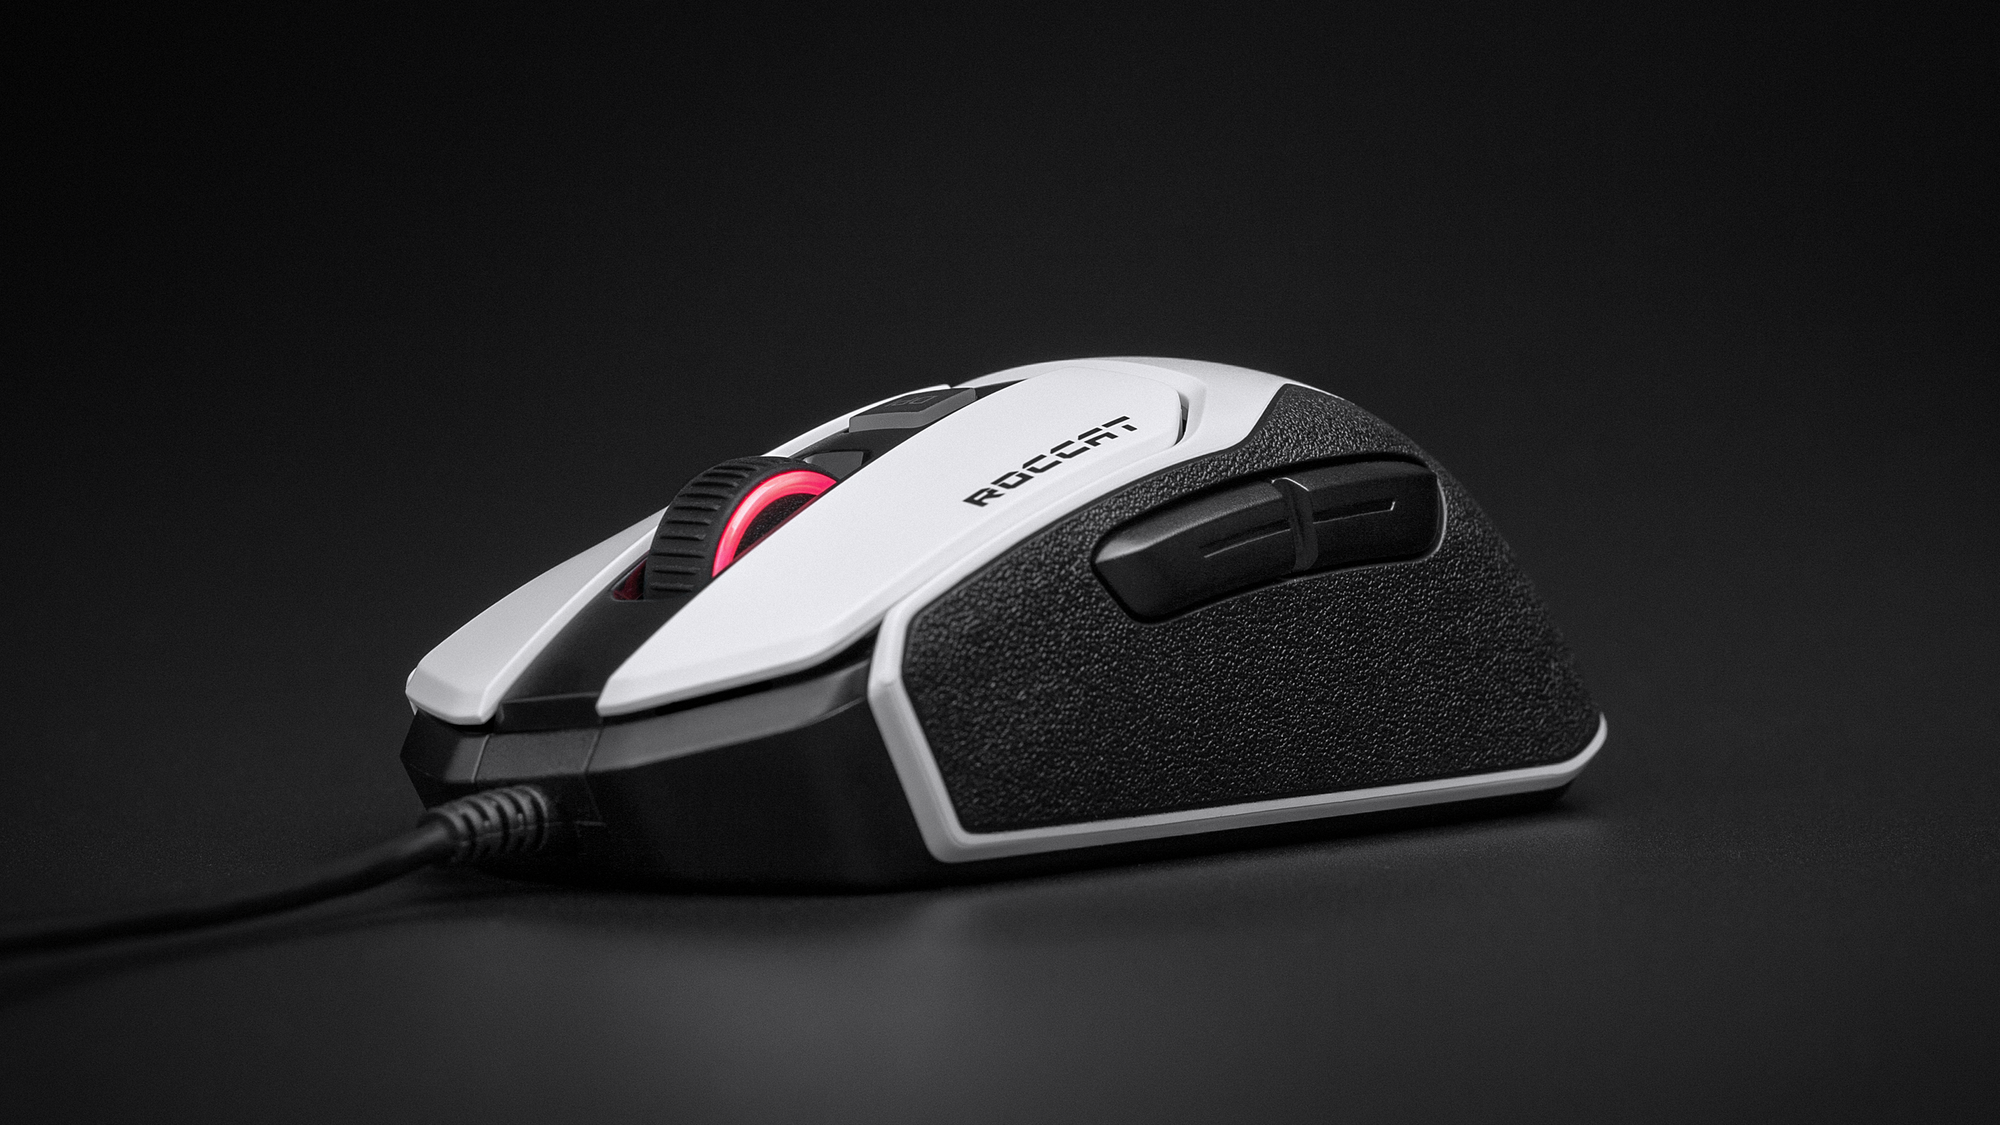 Kain 100 AIMO Titan-Click Gaming Mouse by ROCCAT®